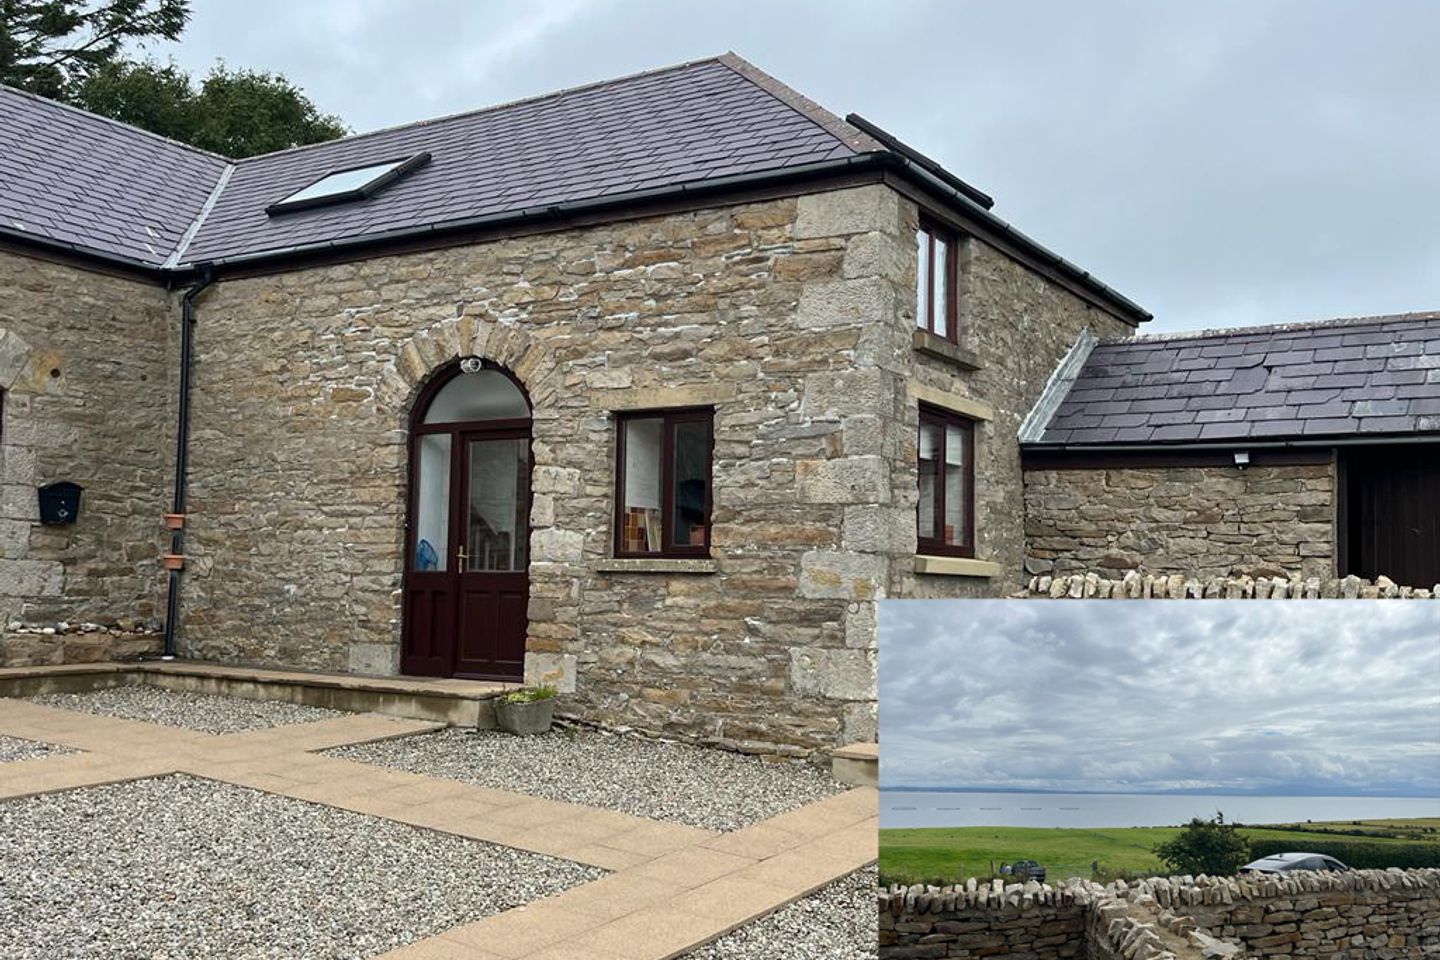 6 The Barn, Dunkineely, Co. Donegal